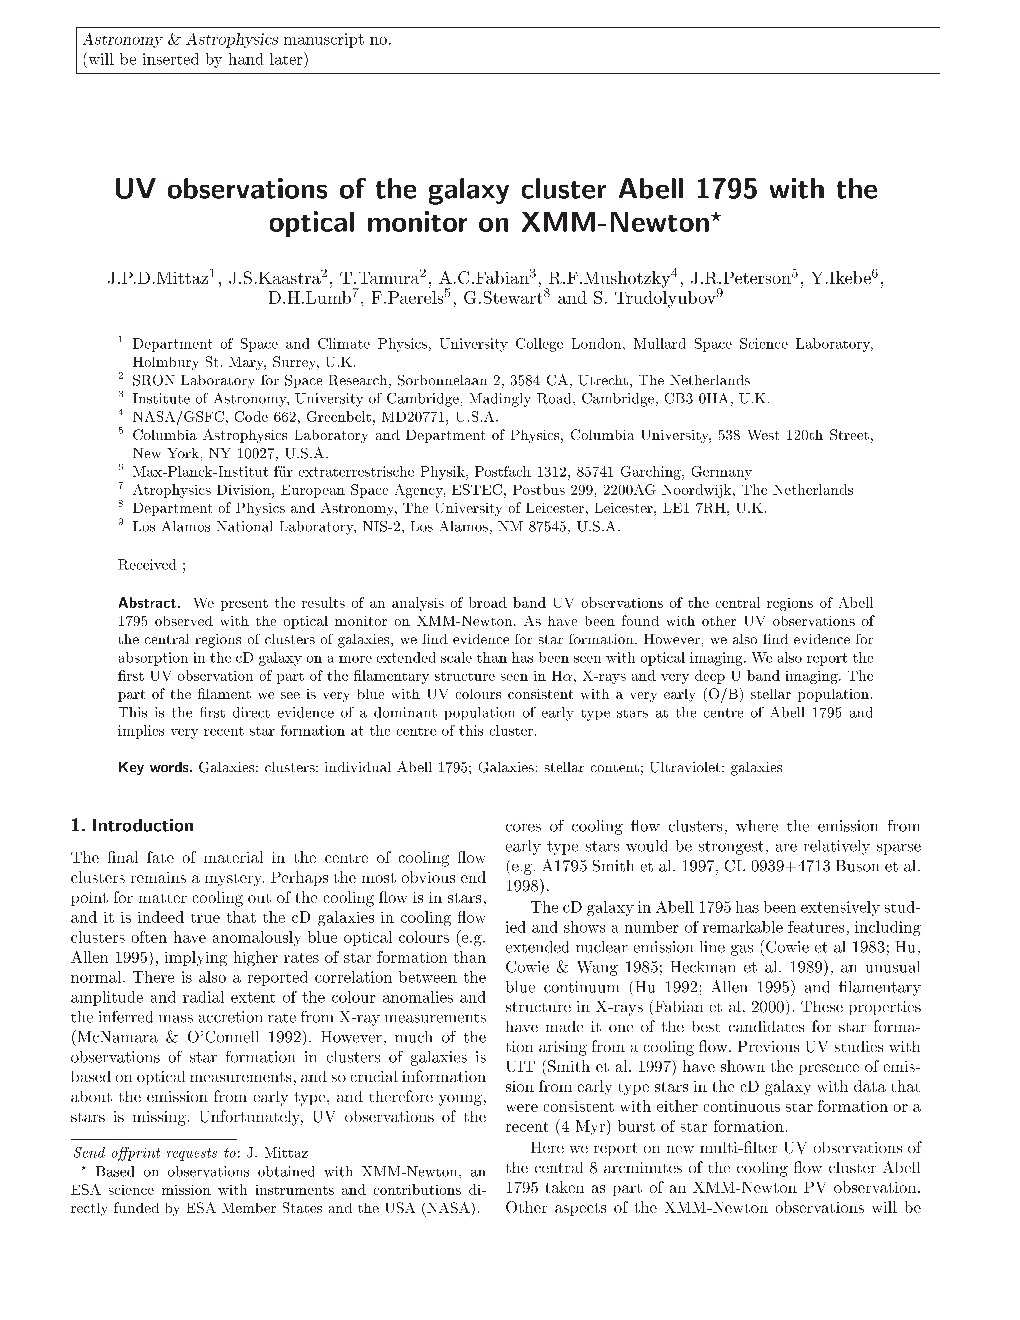 UV Observations of the Galaxy Cluster Abell 1795 With